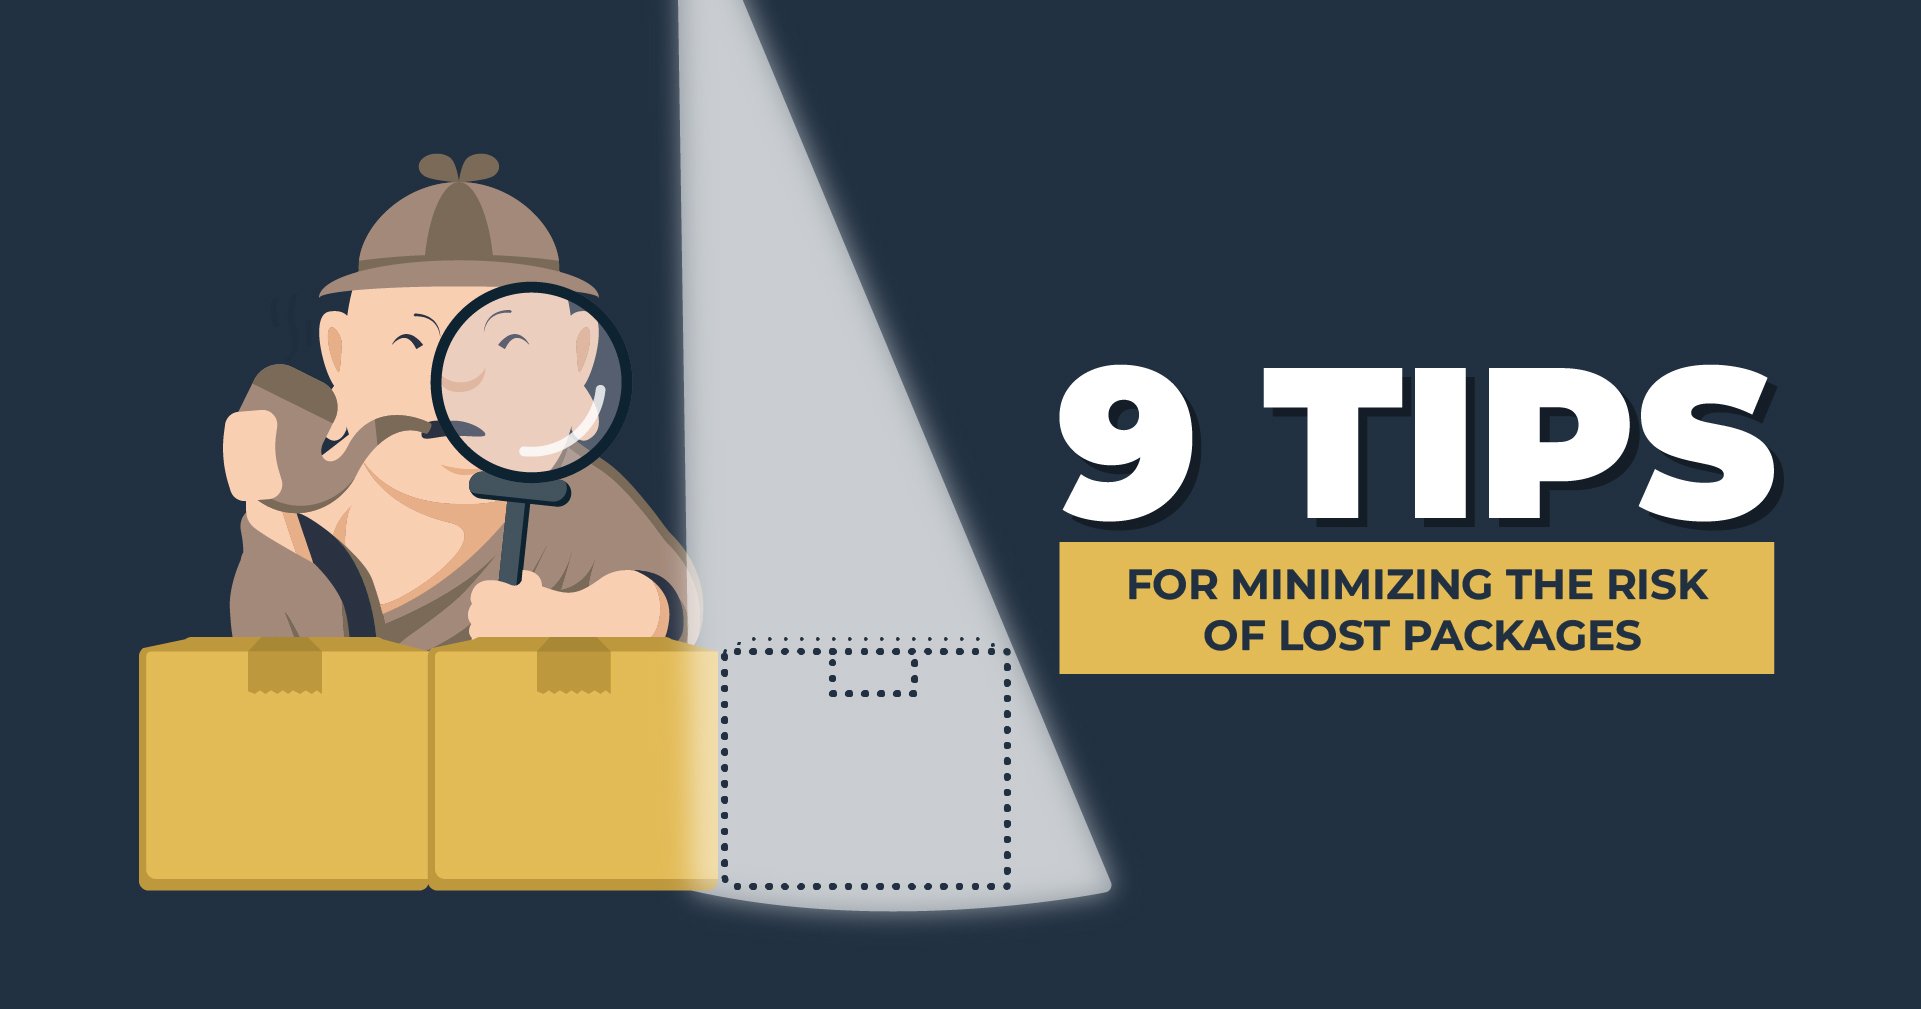 Minimize the Risk of Lost Packages